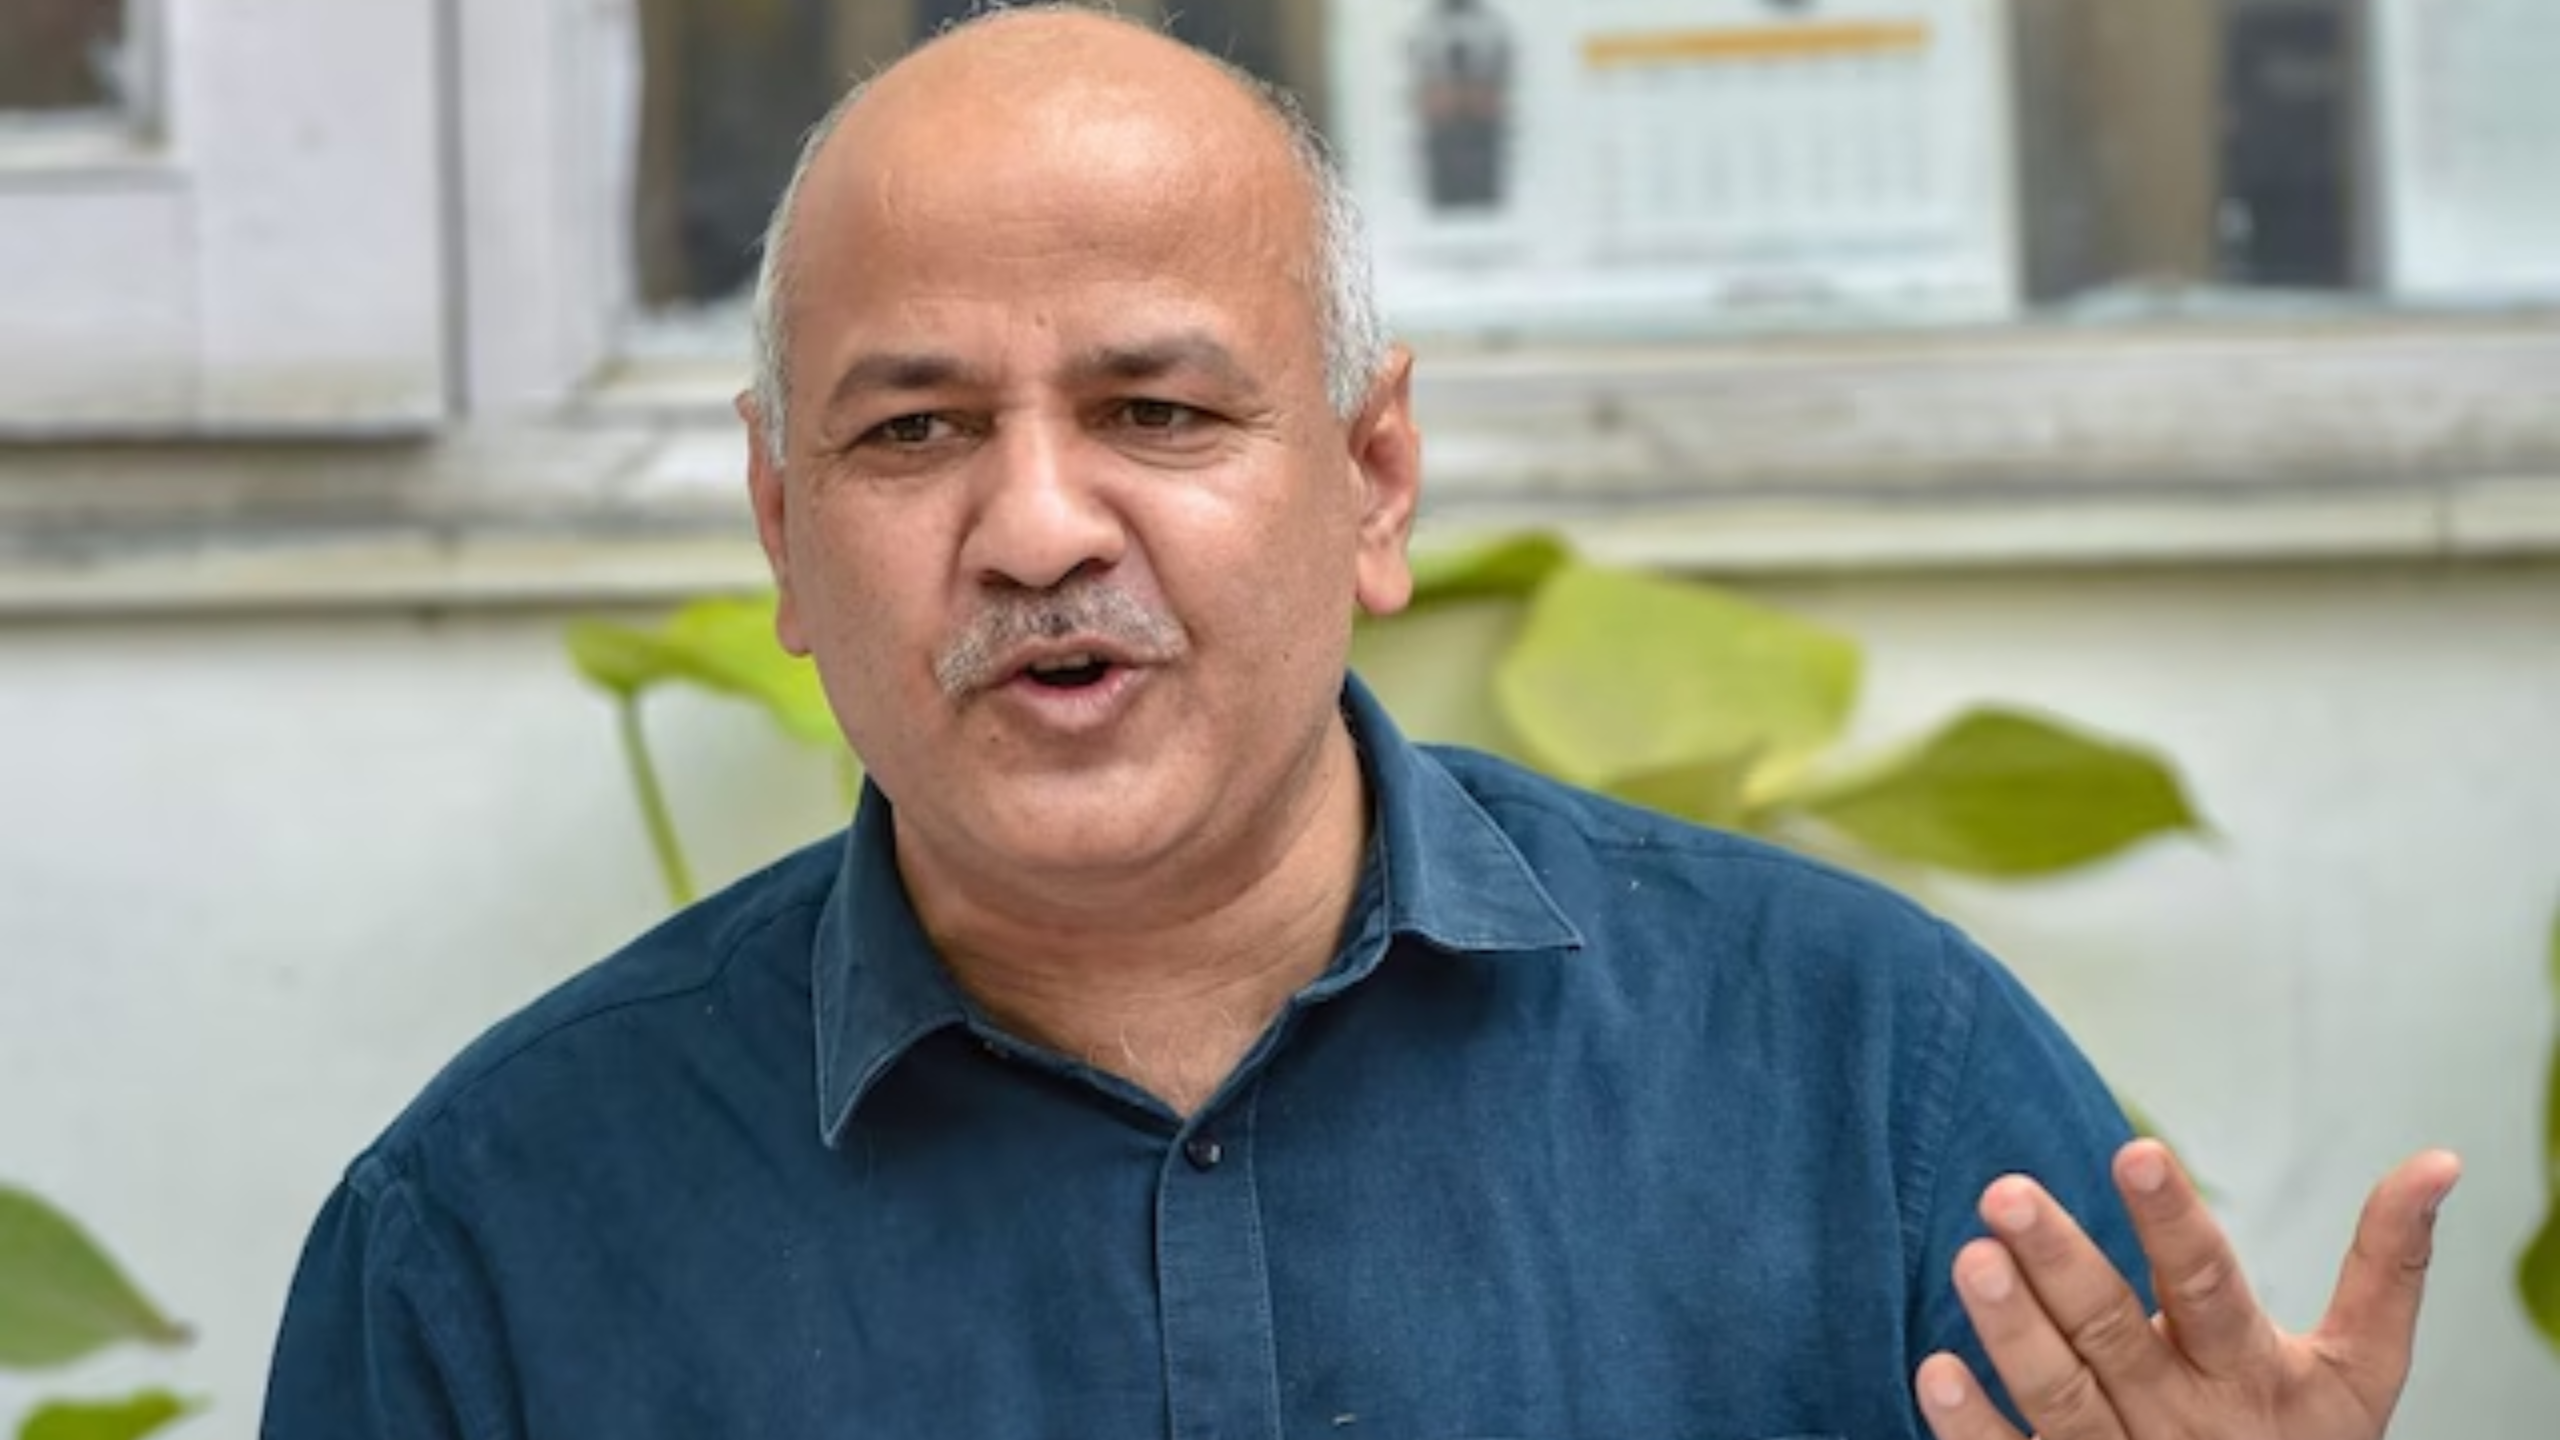 Delhi Excise Policy Case Manish Sisodia Bail Denied By Court For Second Time